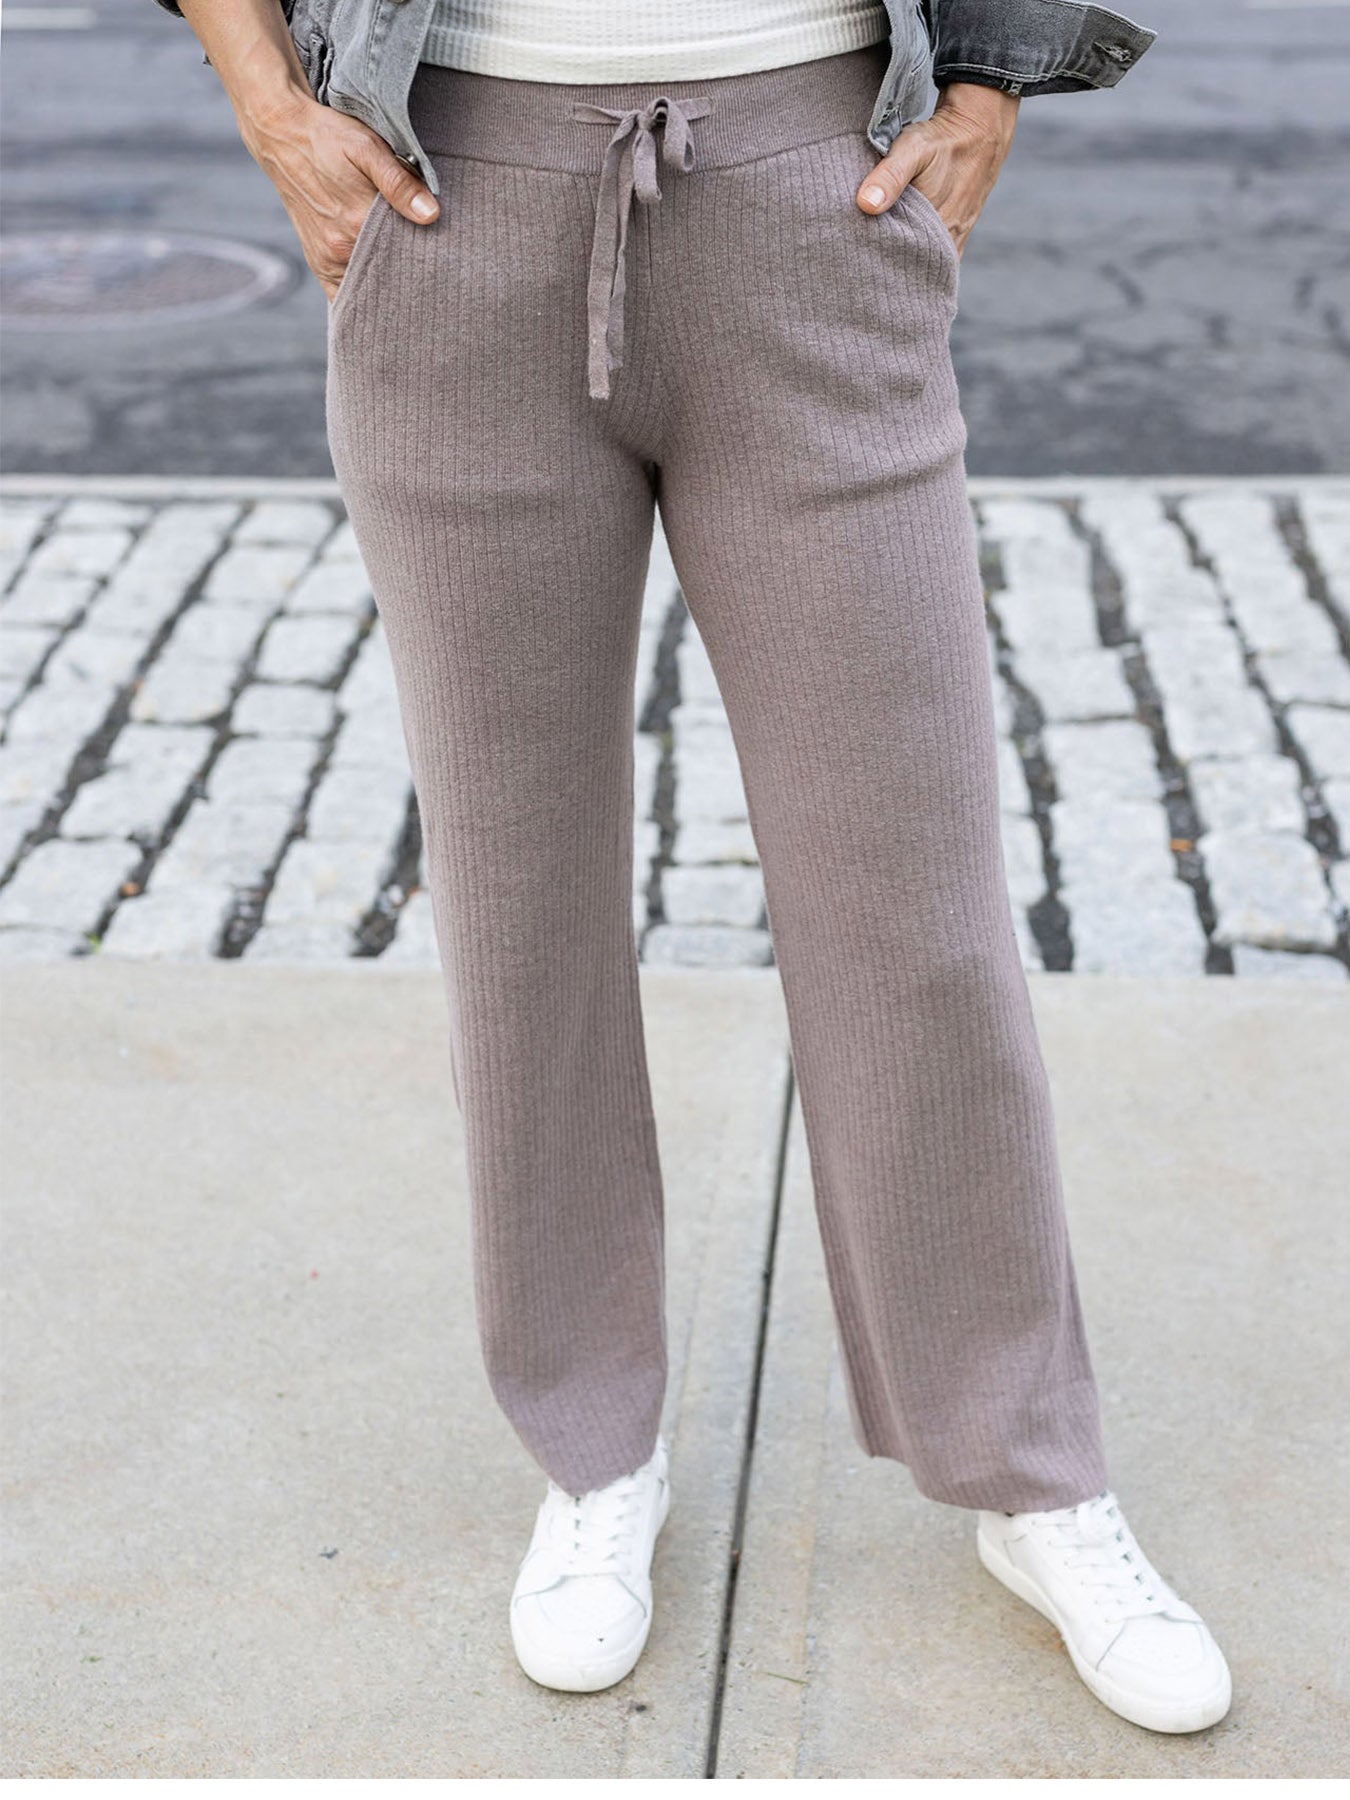 Classic & Cozy Ribbed Sweater Pants in Almondine by Grace & Lace